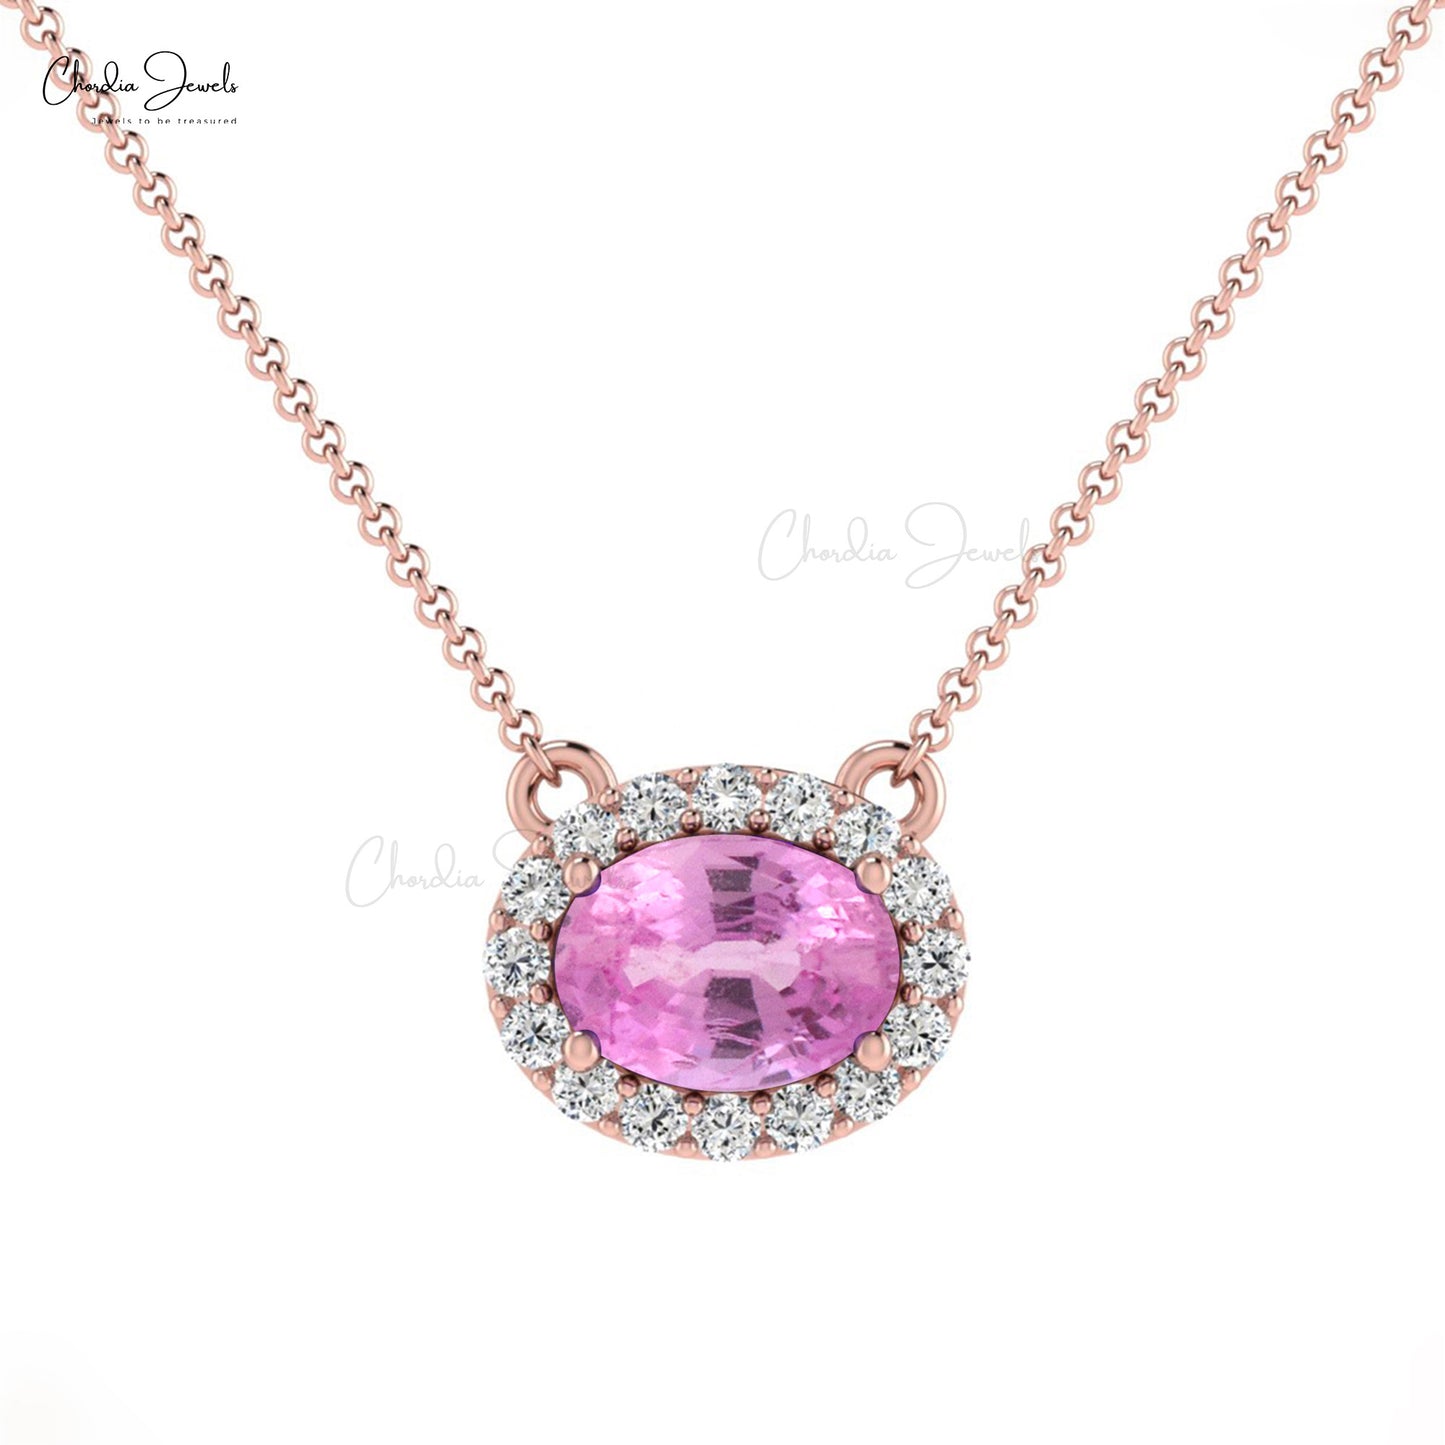 Natural Pink Sapphire Necklace, 14K Solid Gold Diamond Necklace, 0.75 Carats Oval Faceted Gemstone Necklace Women's Jewelry, Gift for Her Pink